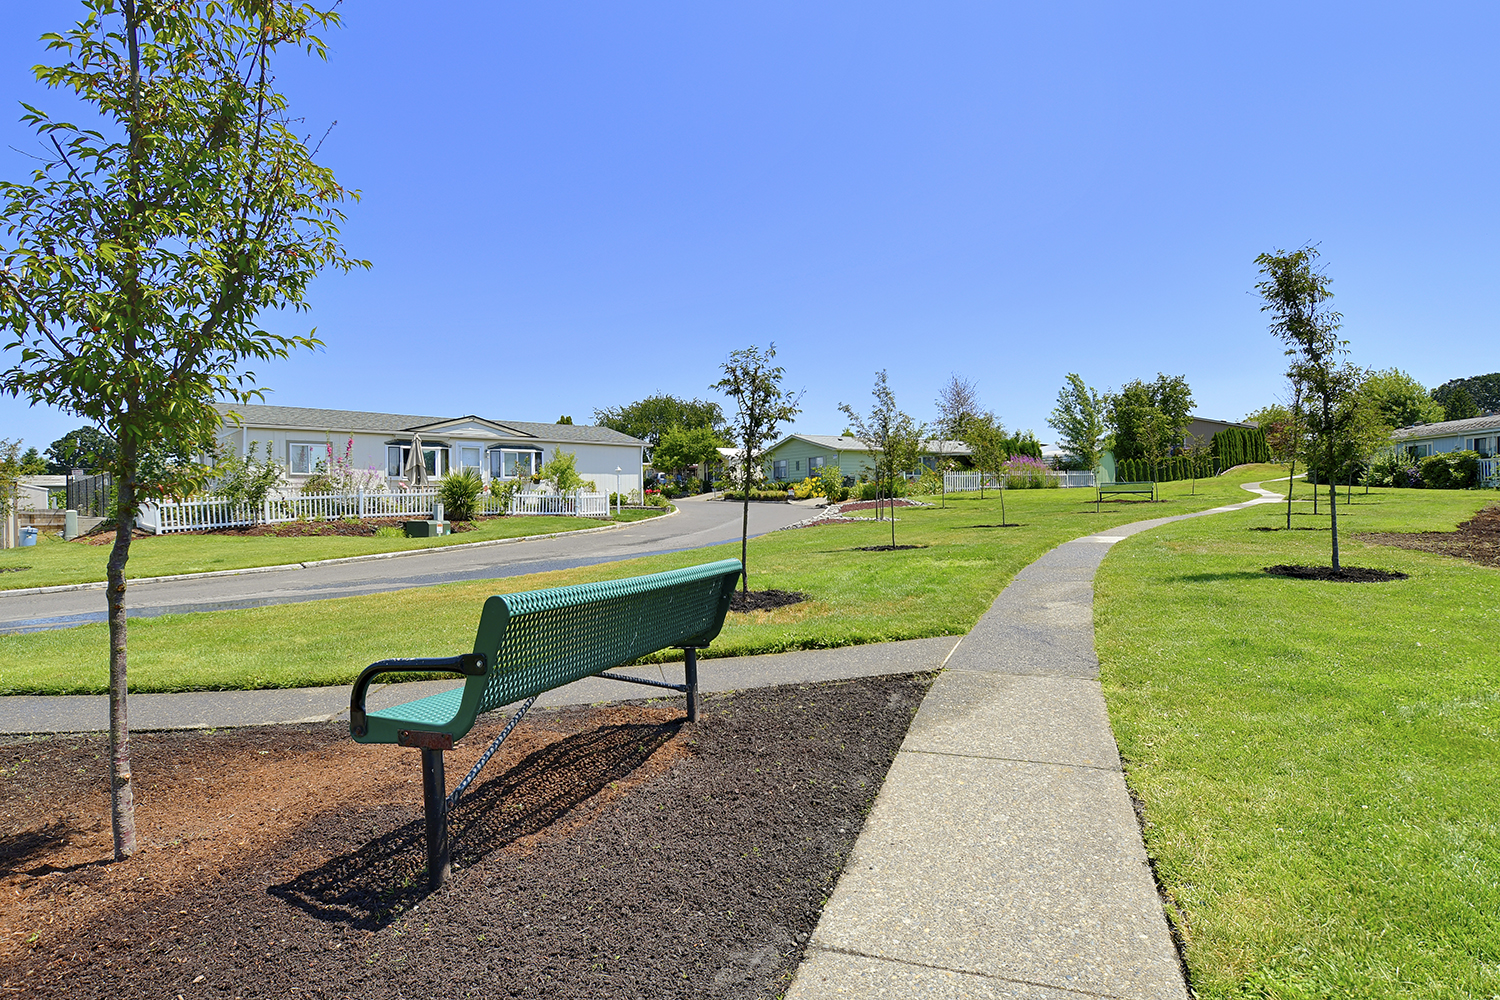 Clean paved walking paths through the community. Benches along the way.